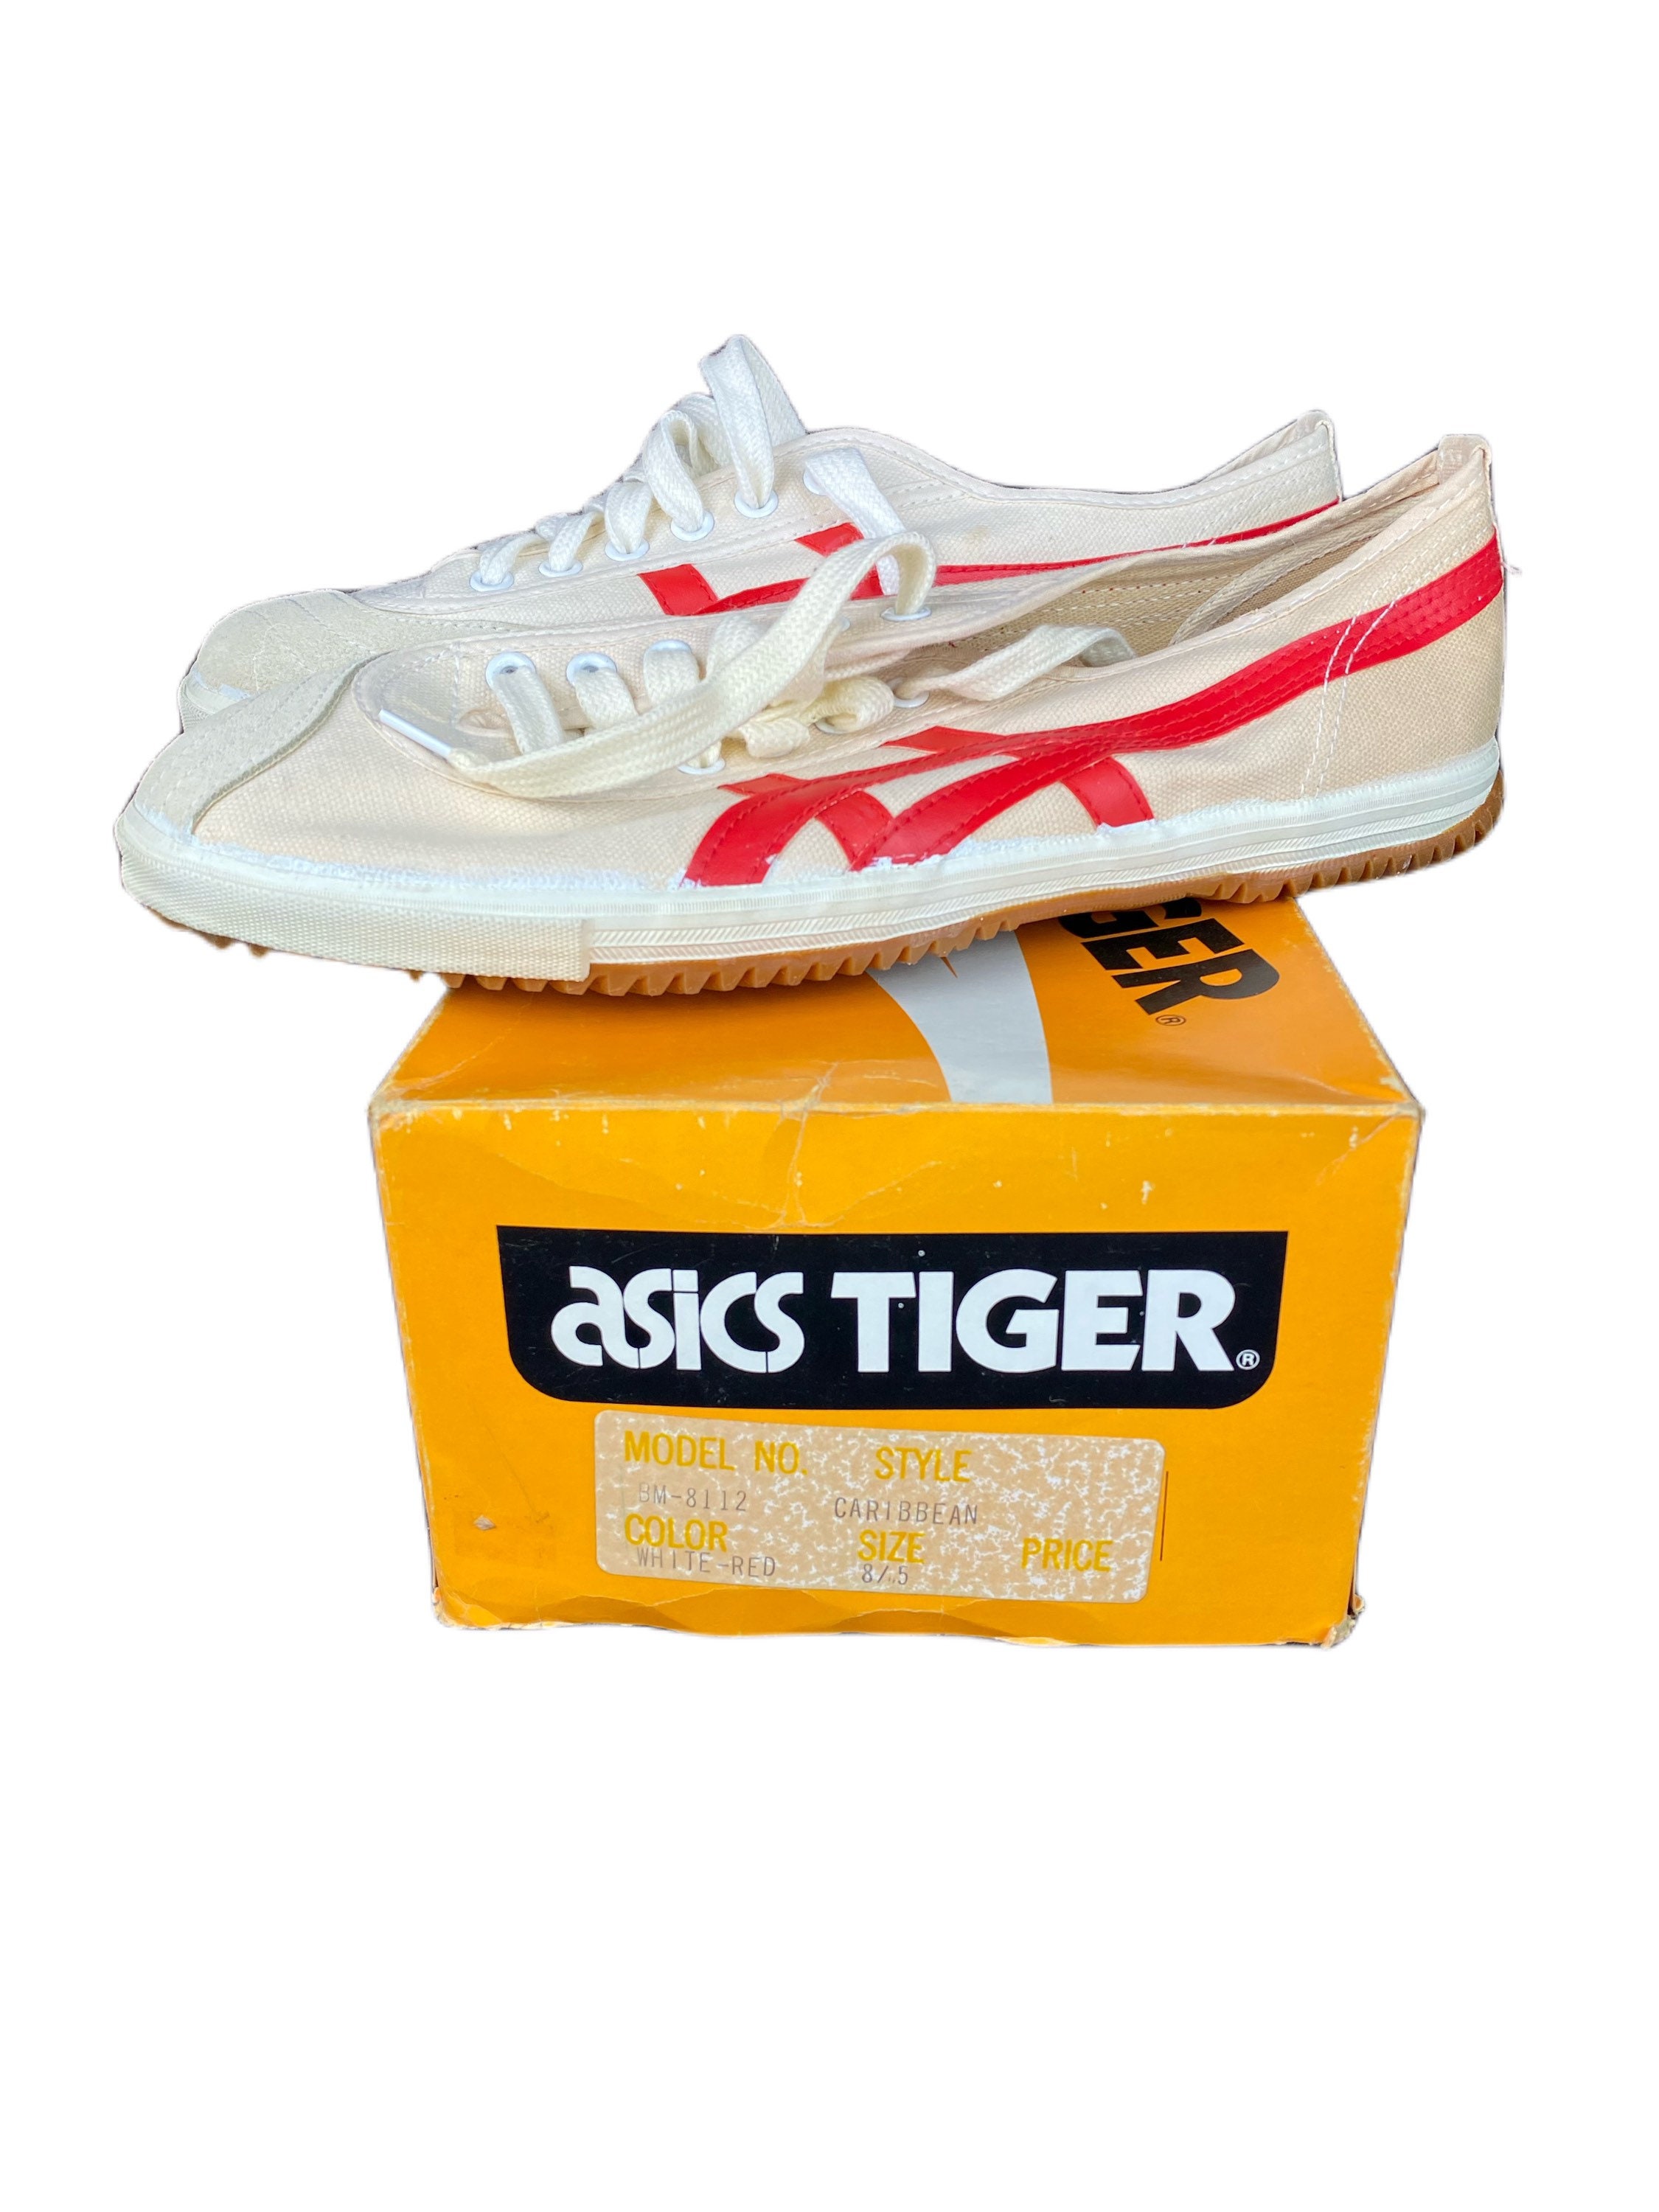 Vintage 80s ASICS Shoes Sneakers -